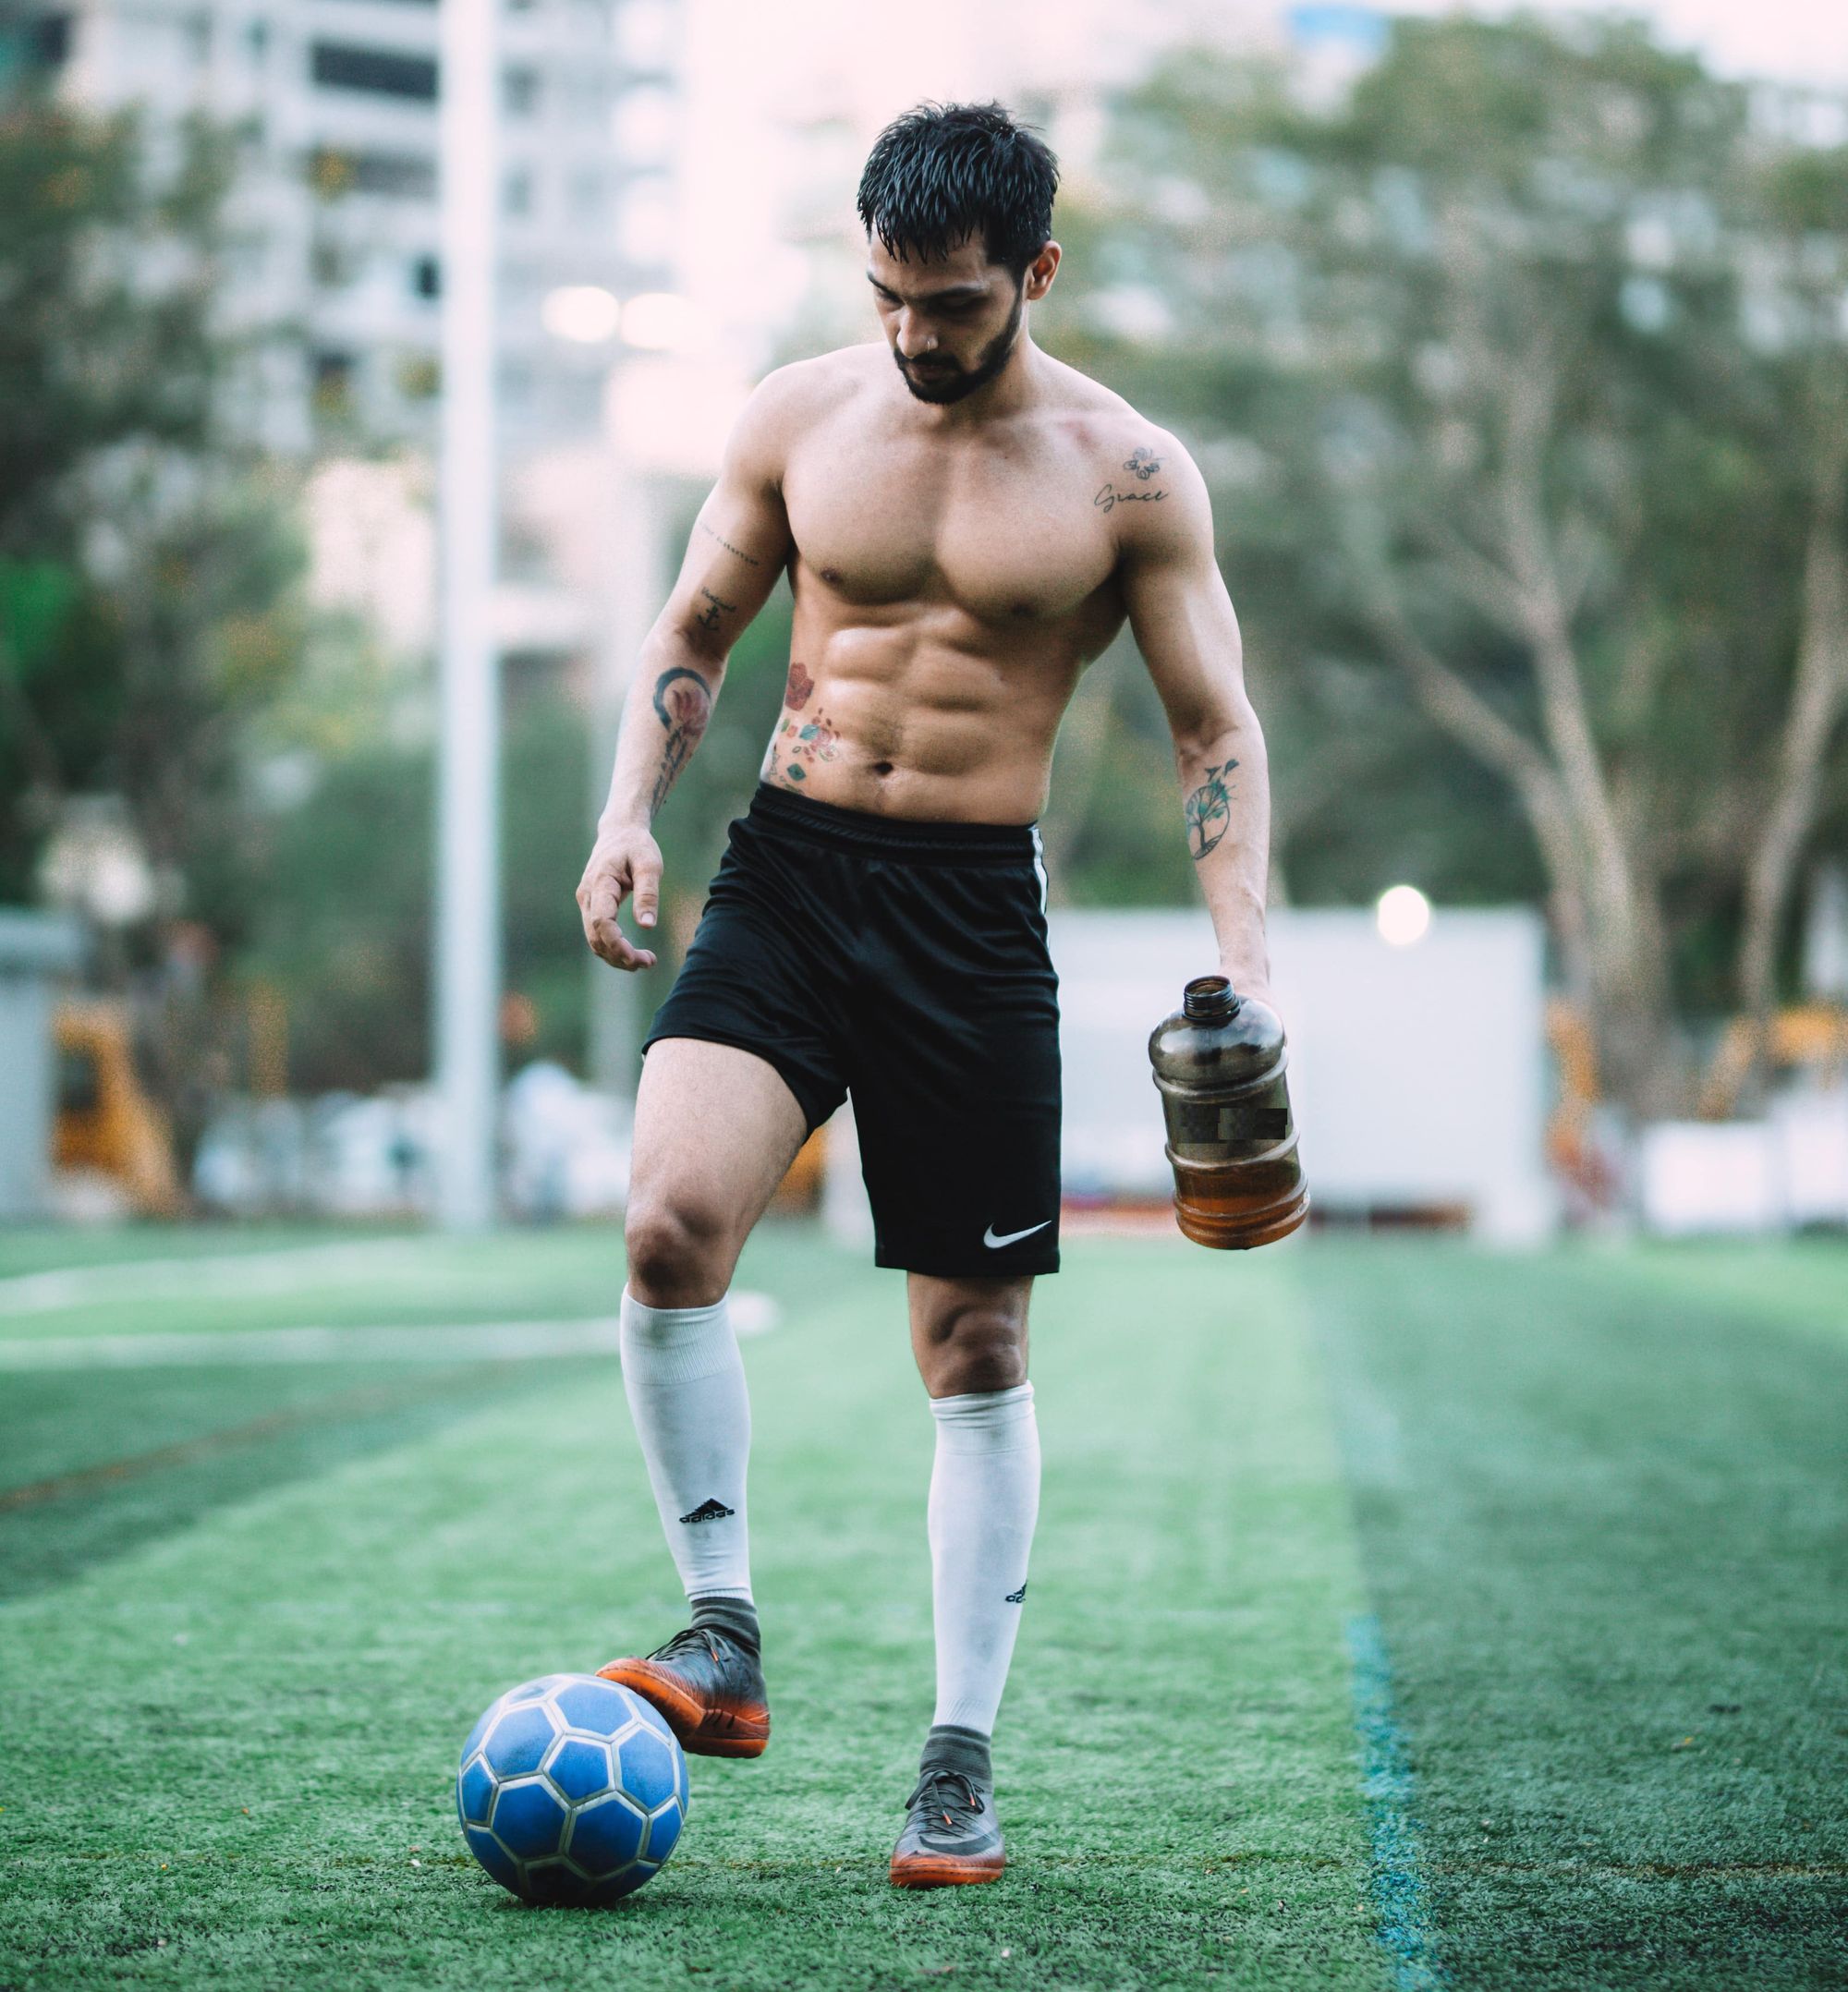 Soccer player taking a break for a protein drink.